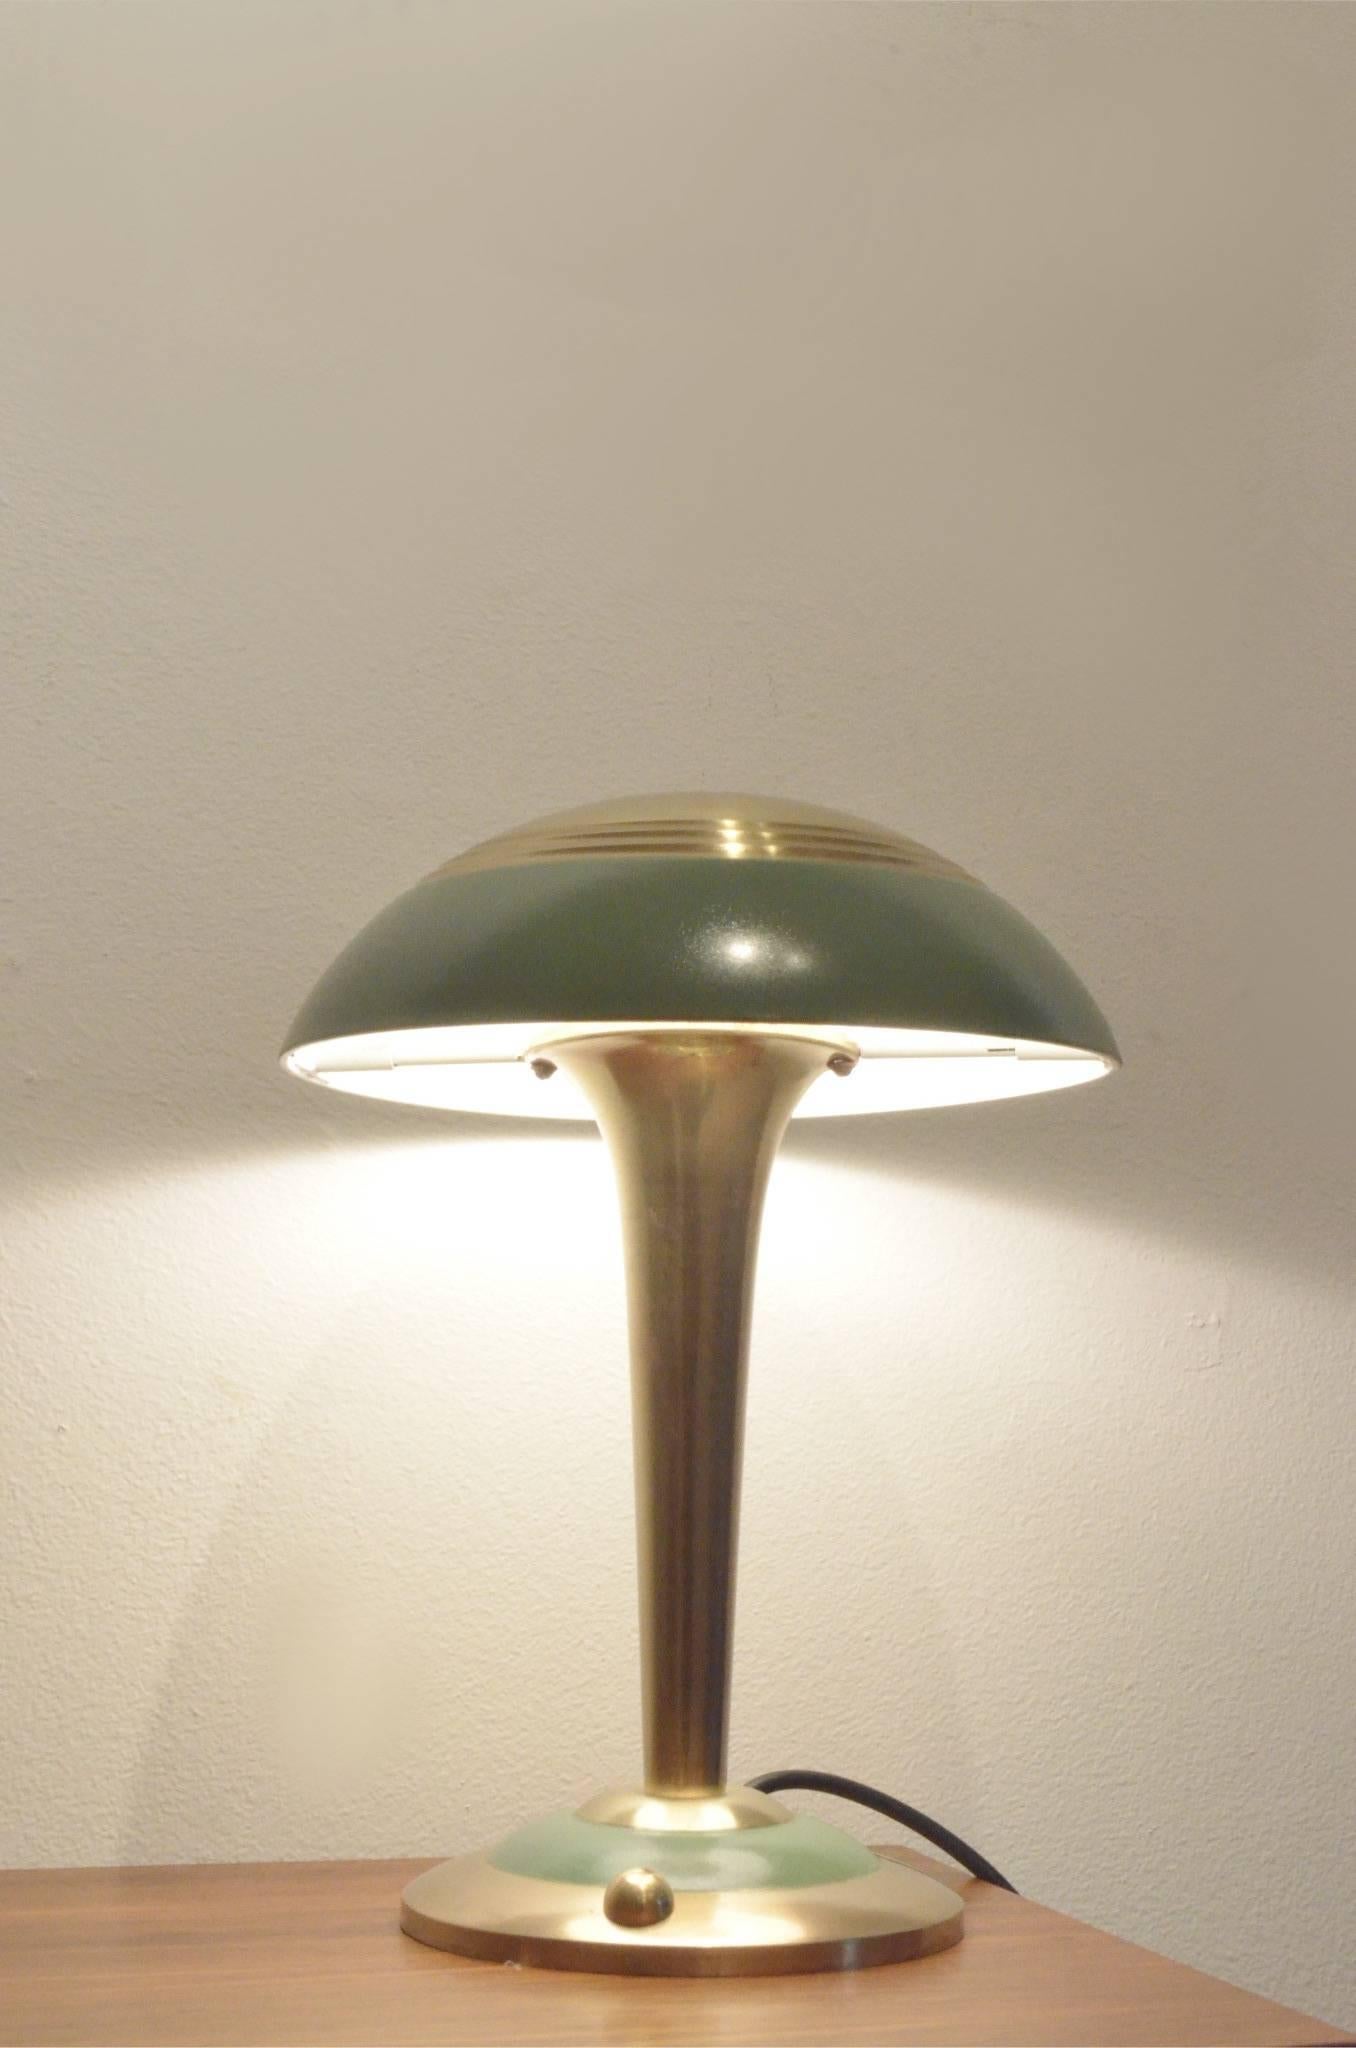 1920s French Art Deco Brass and Green Paint Swivel Top Desk Table Lamp 1